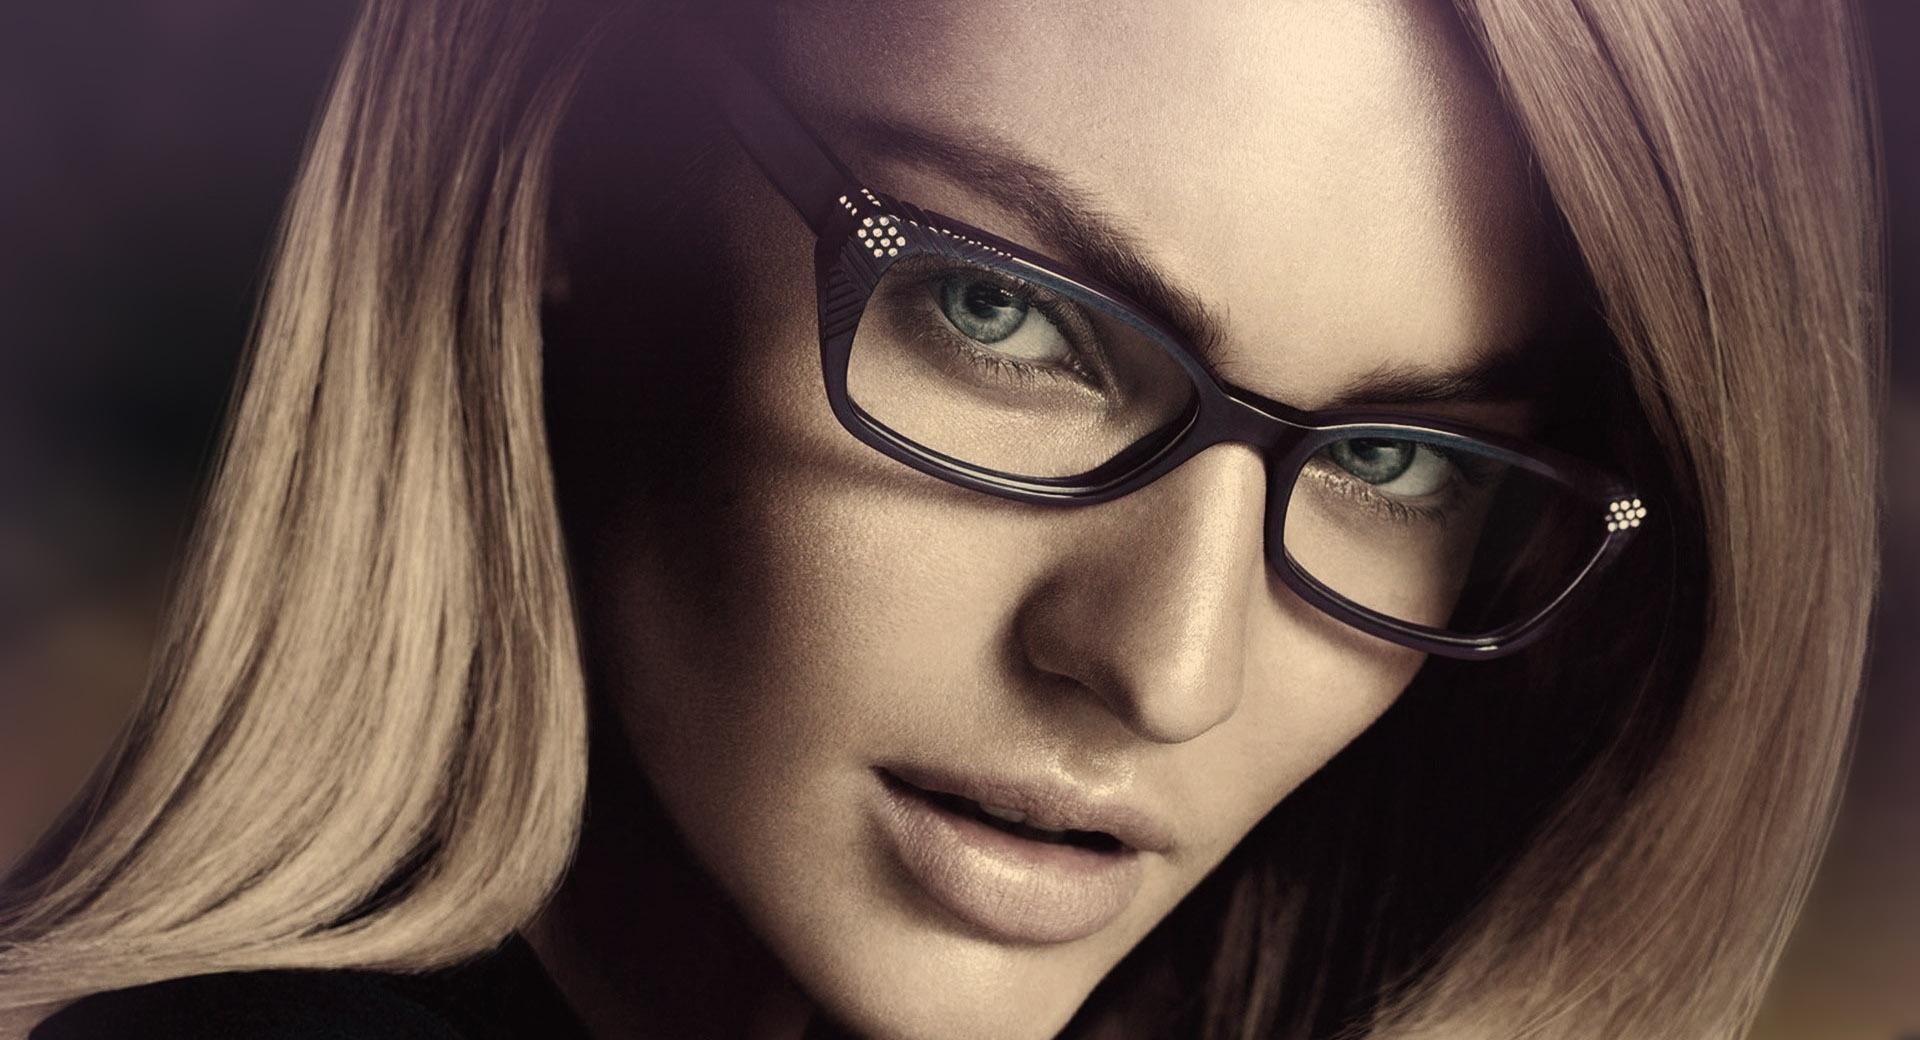 Candice Swanepoel Glasses wallpapers HD quality